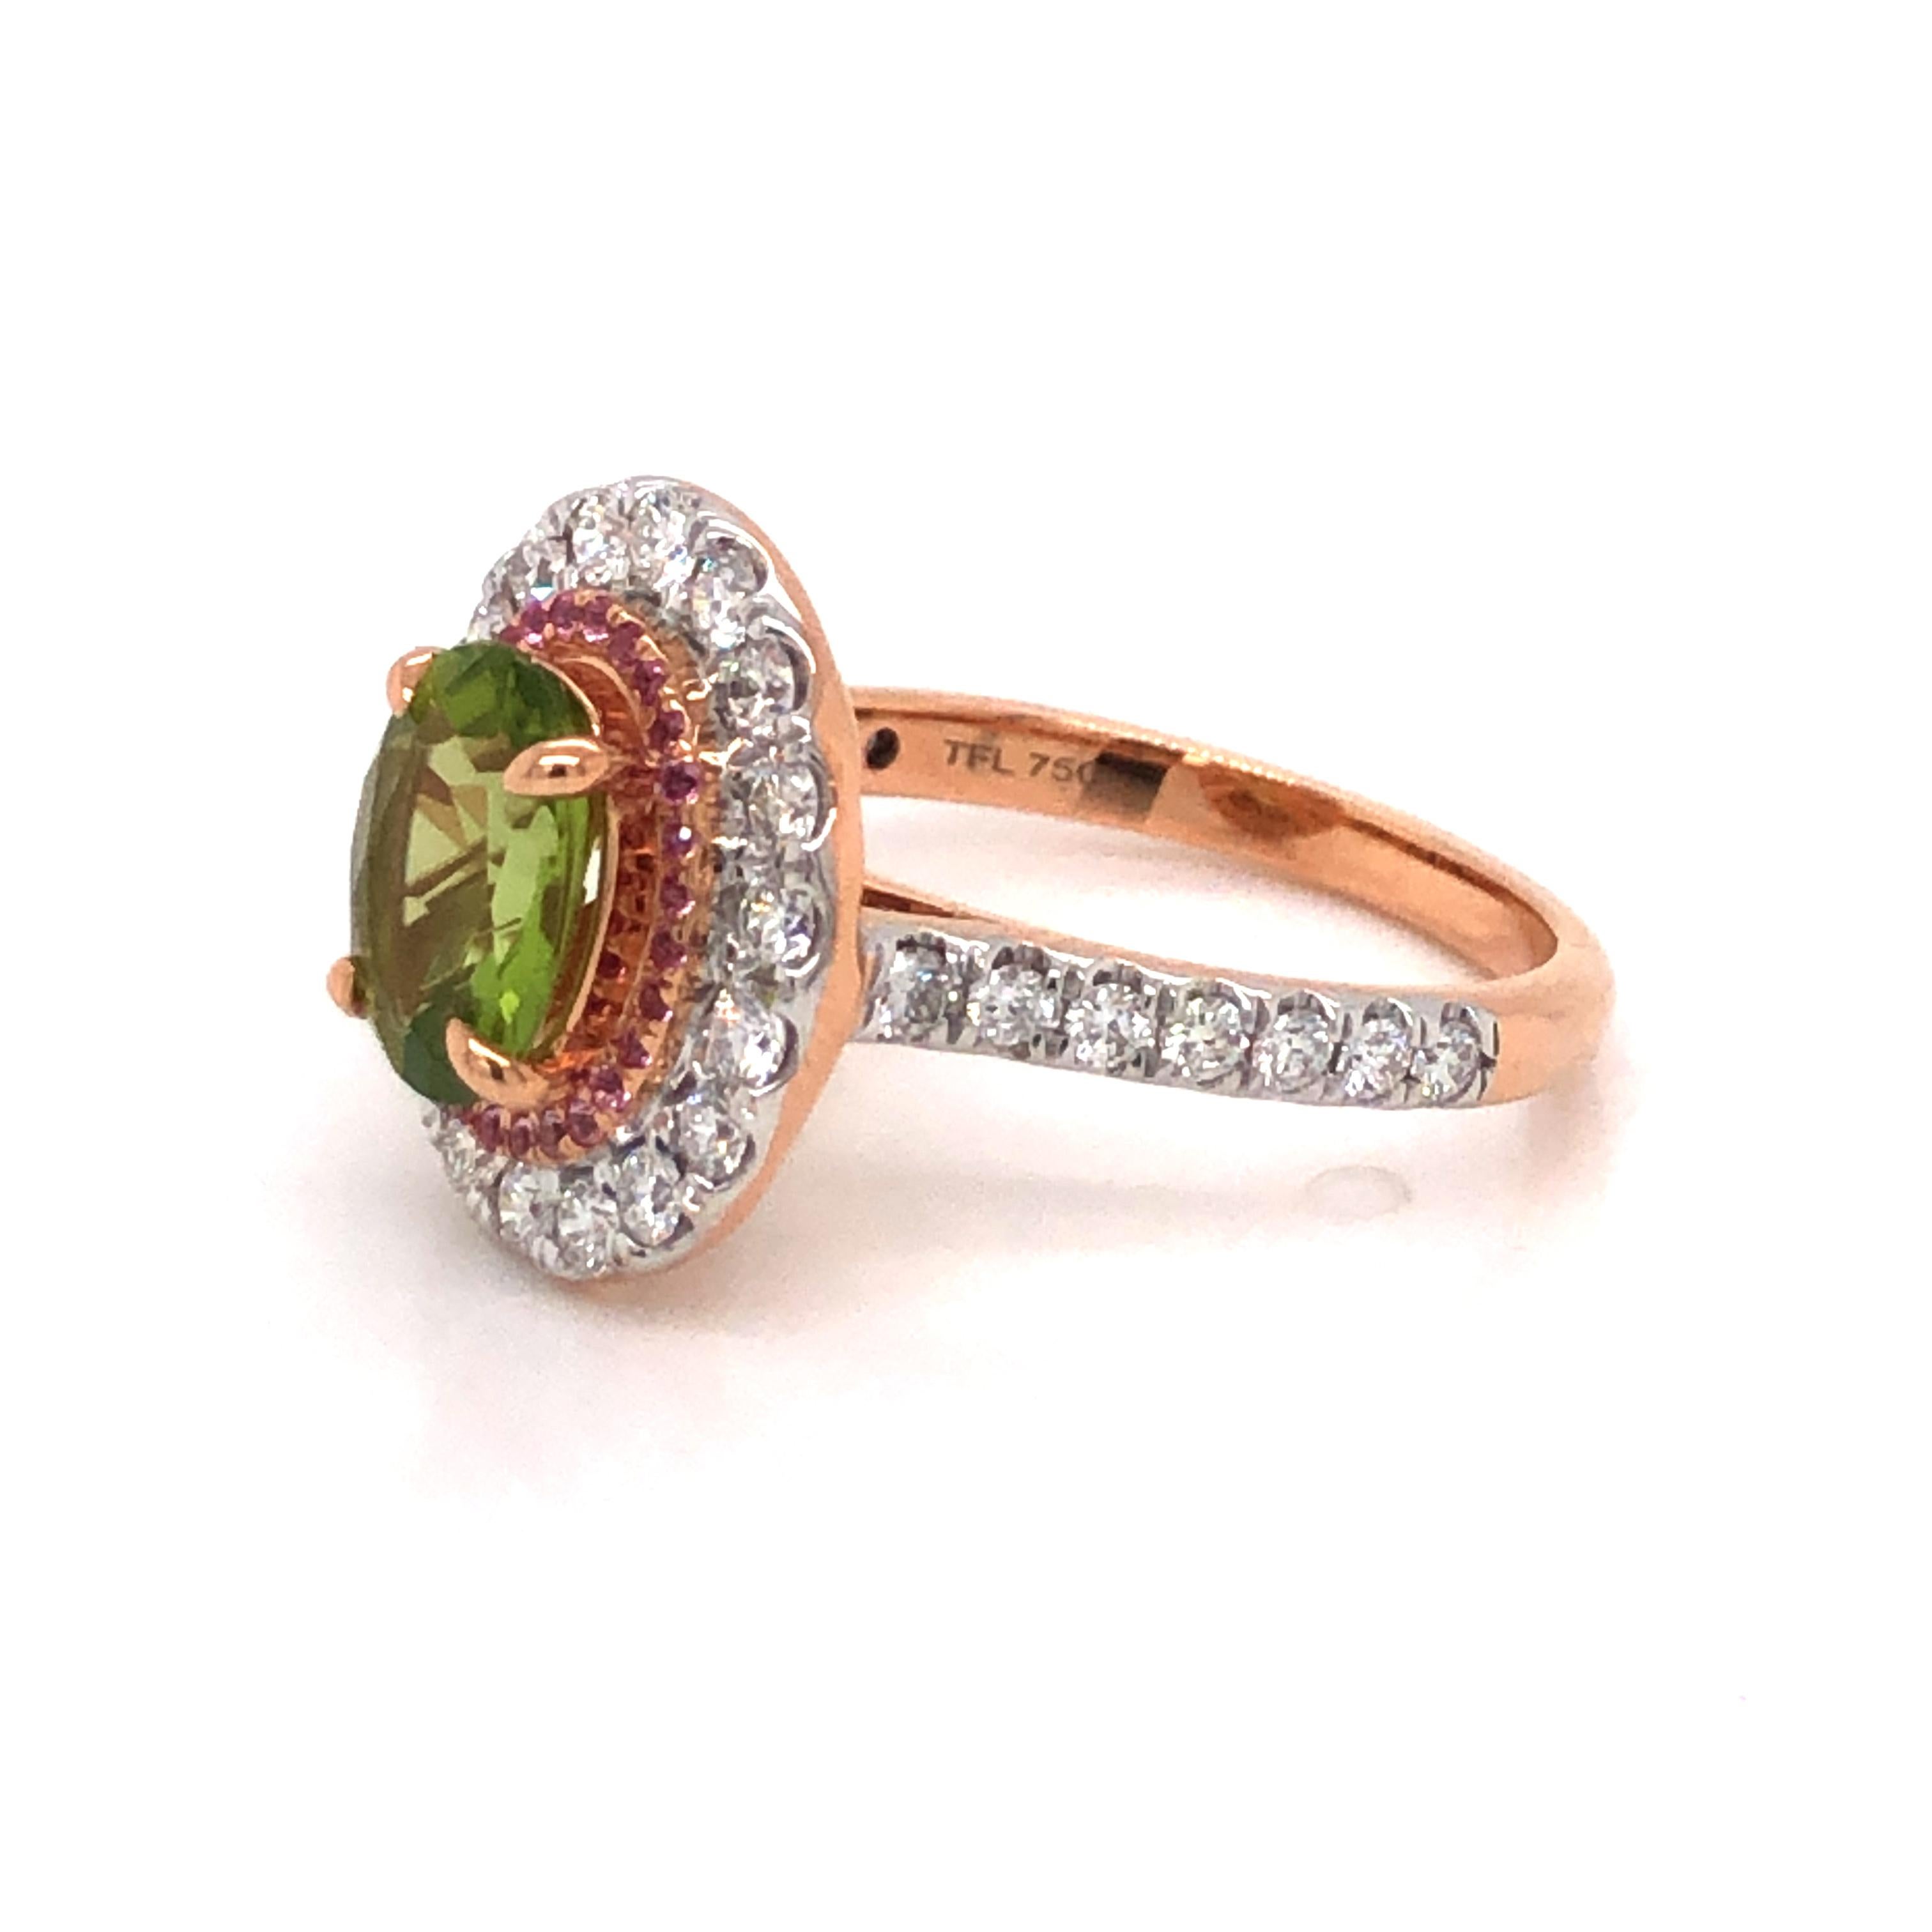 2.5 Carat Green Peridot Pink Sapphire Diamond Engagement Cocktail 18KT Ring For Sale 9